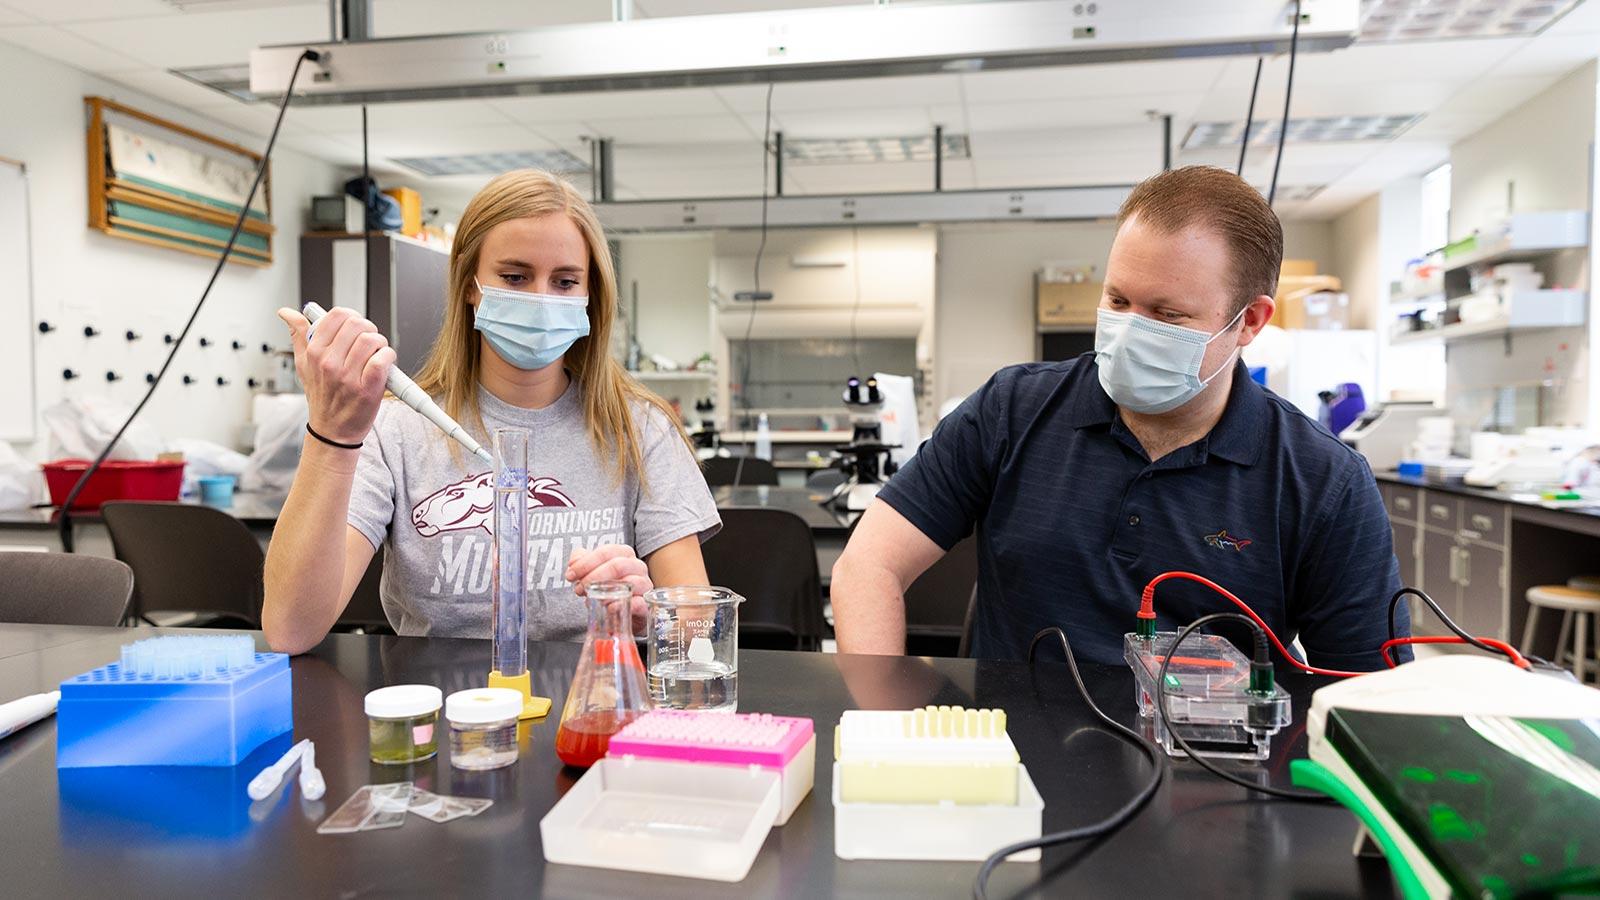 Tenly Hansen and Dr. Chad Leugers working in a lab at Morningside.